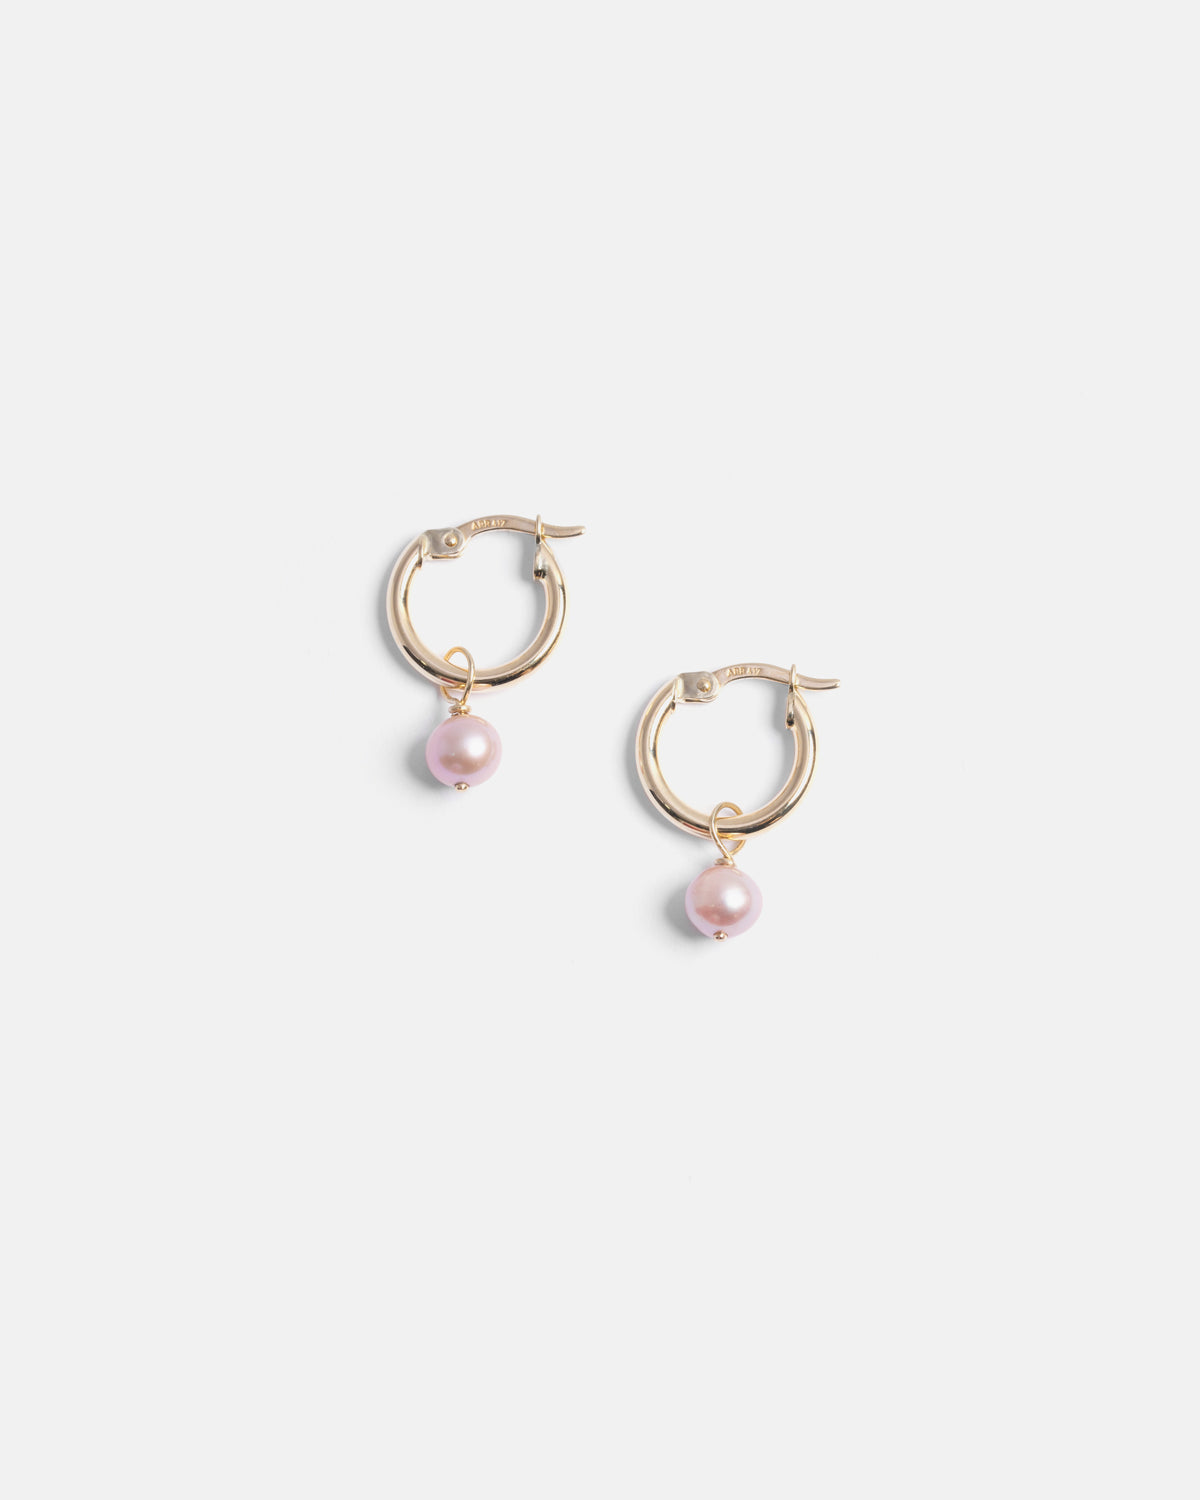 Pom-pom Hoops in Gold with Pink Pearls